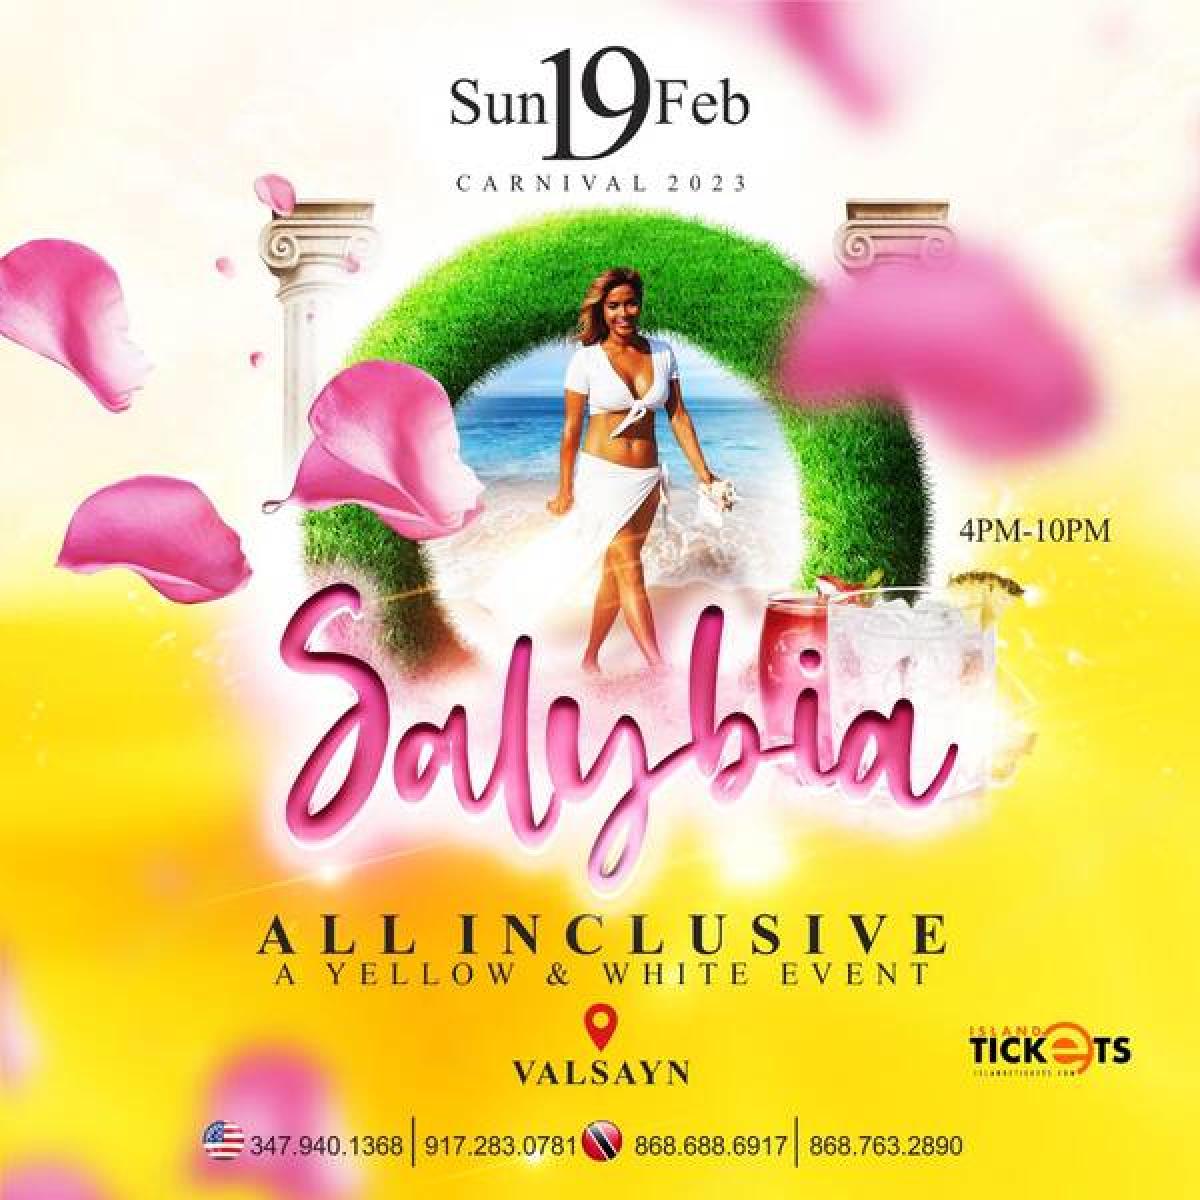 Salybia All-Inclusive flyer or graphic.